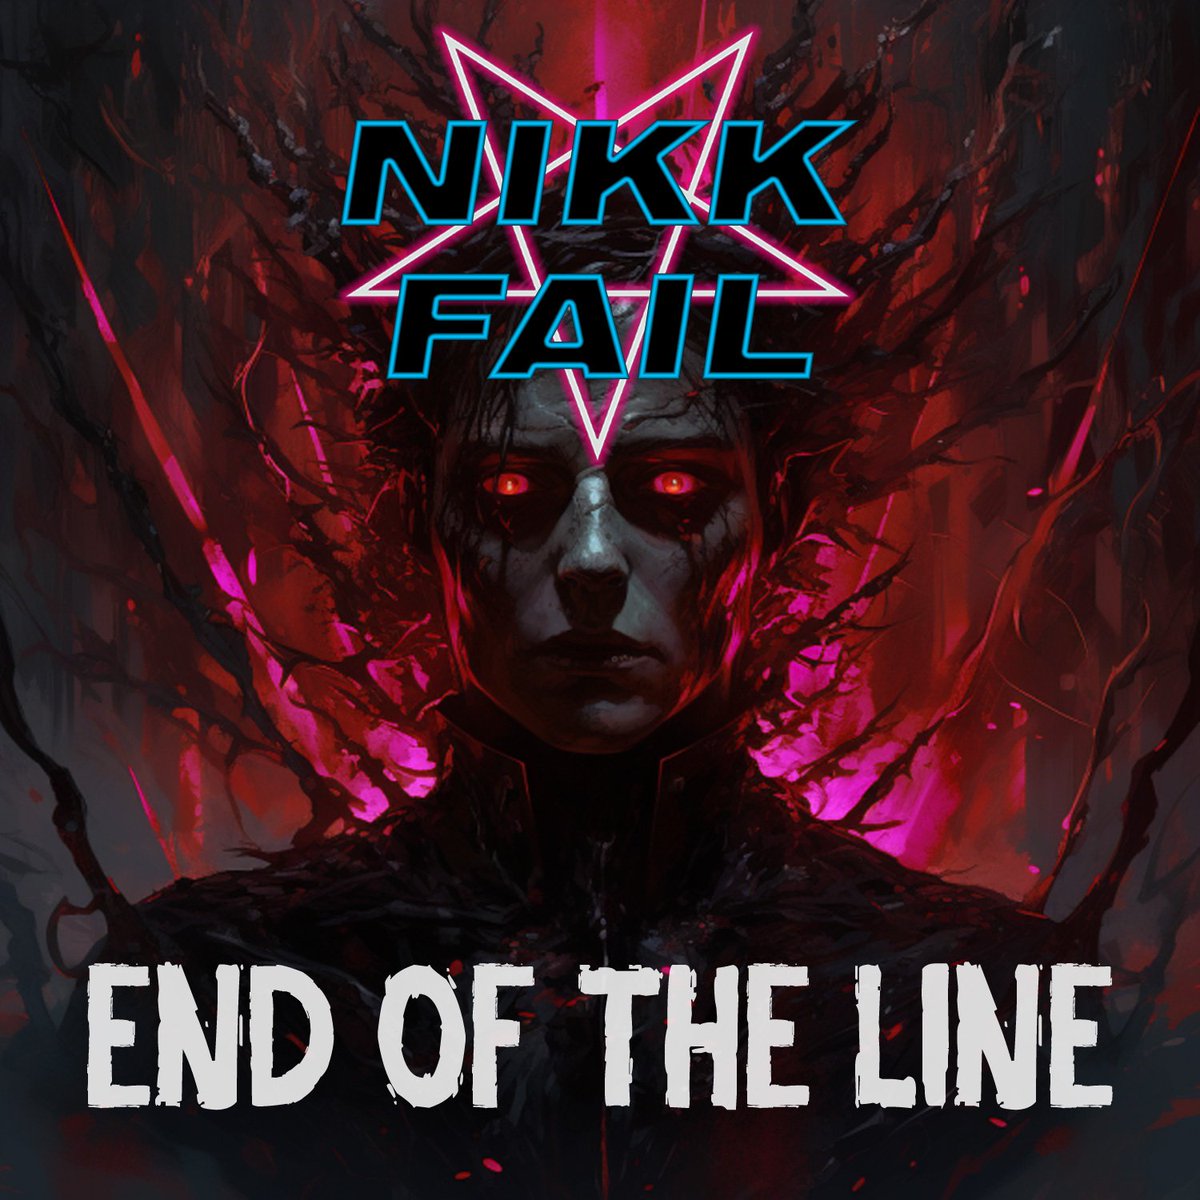 Very soon, and i mean soon, I'll share a little taste from 'End Of The Line'.. meanwhile.. the cover art of the Title Track featuring on Vocals Eleonora Ferrari

#synthwave #horrorsynth #darkwave #darksynth #endoftheline #nikkfail